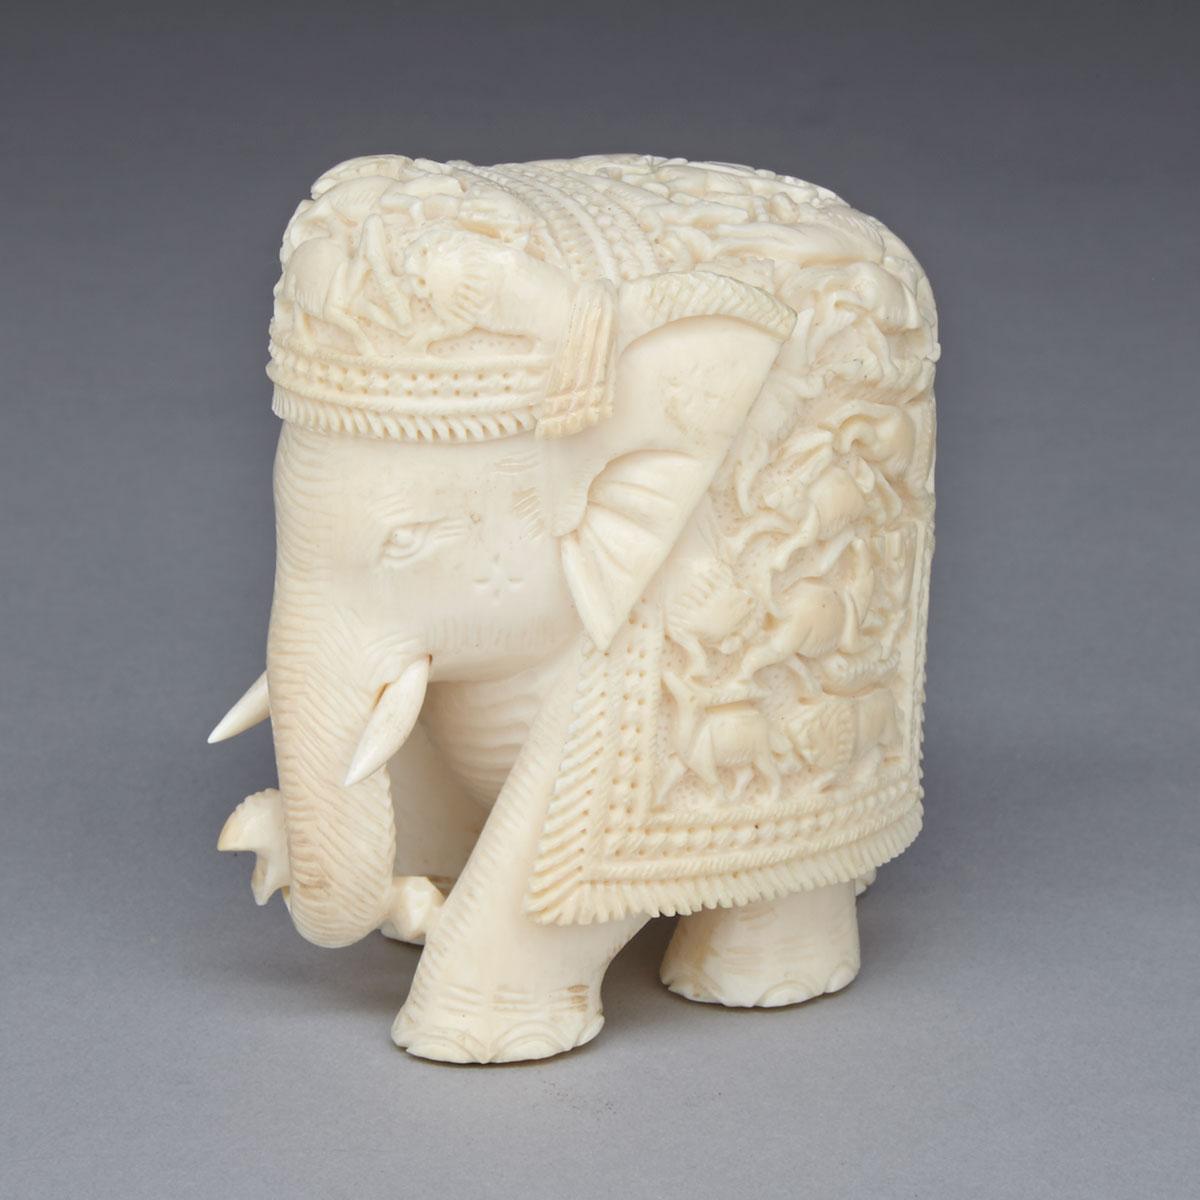 East Indian Carved Ivory Model of an Elephant, early 20th century